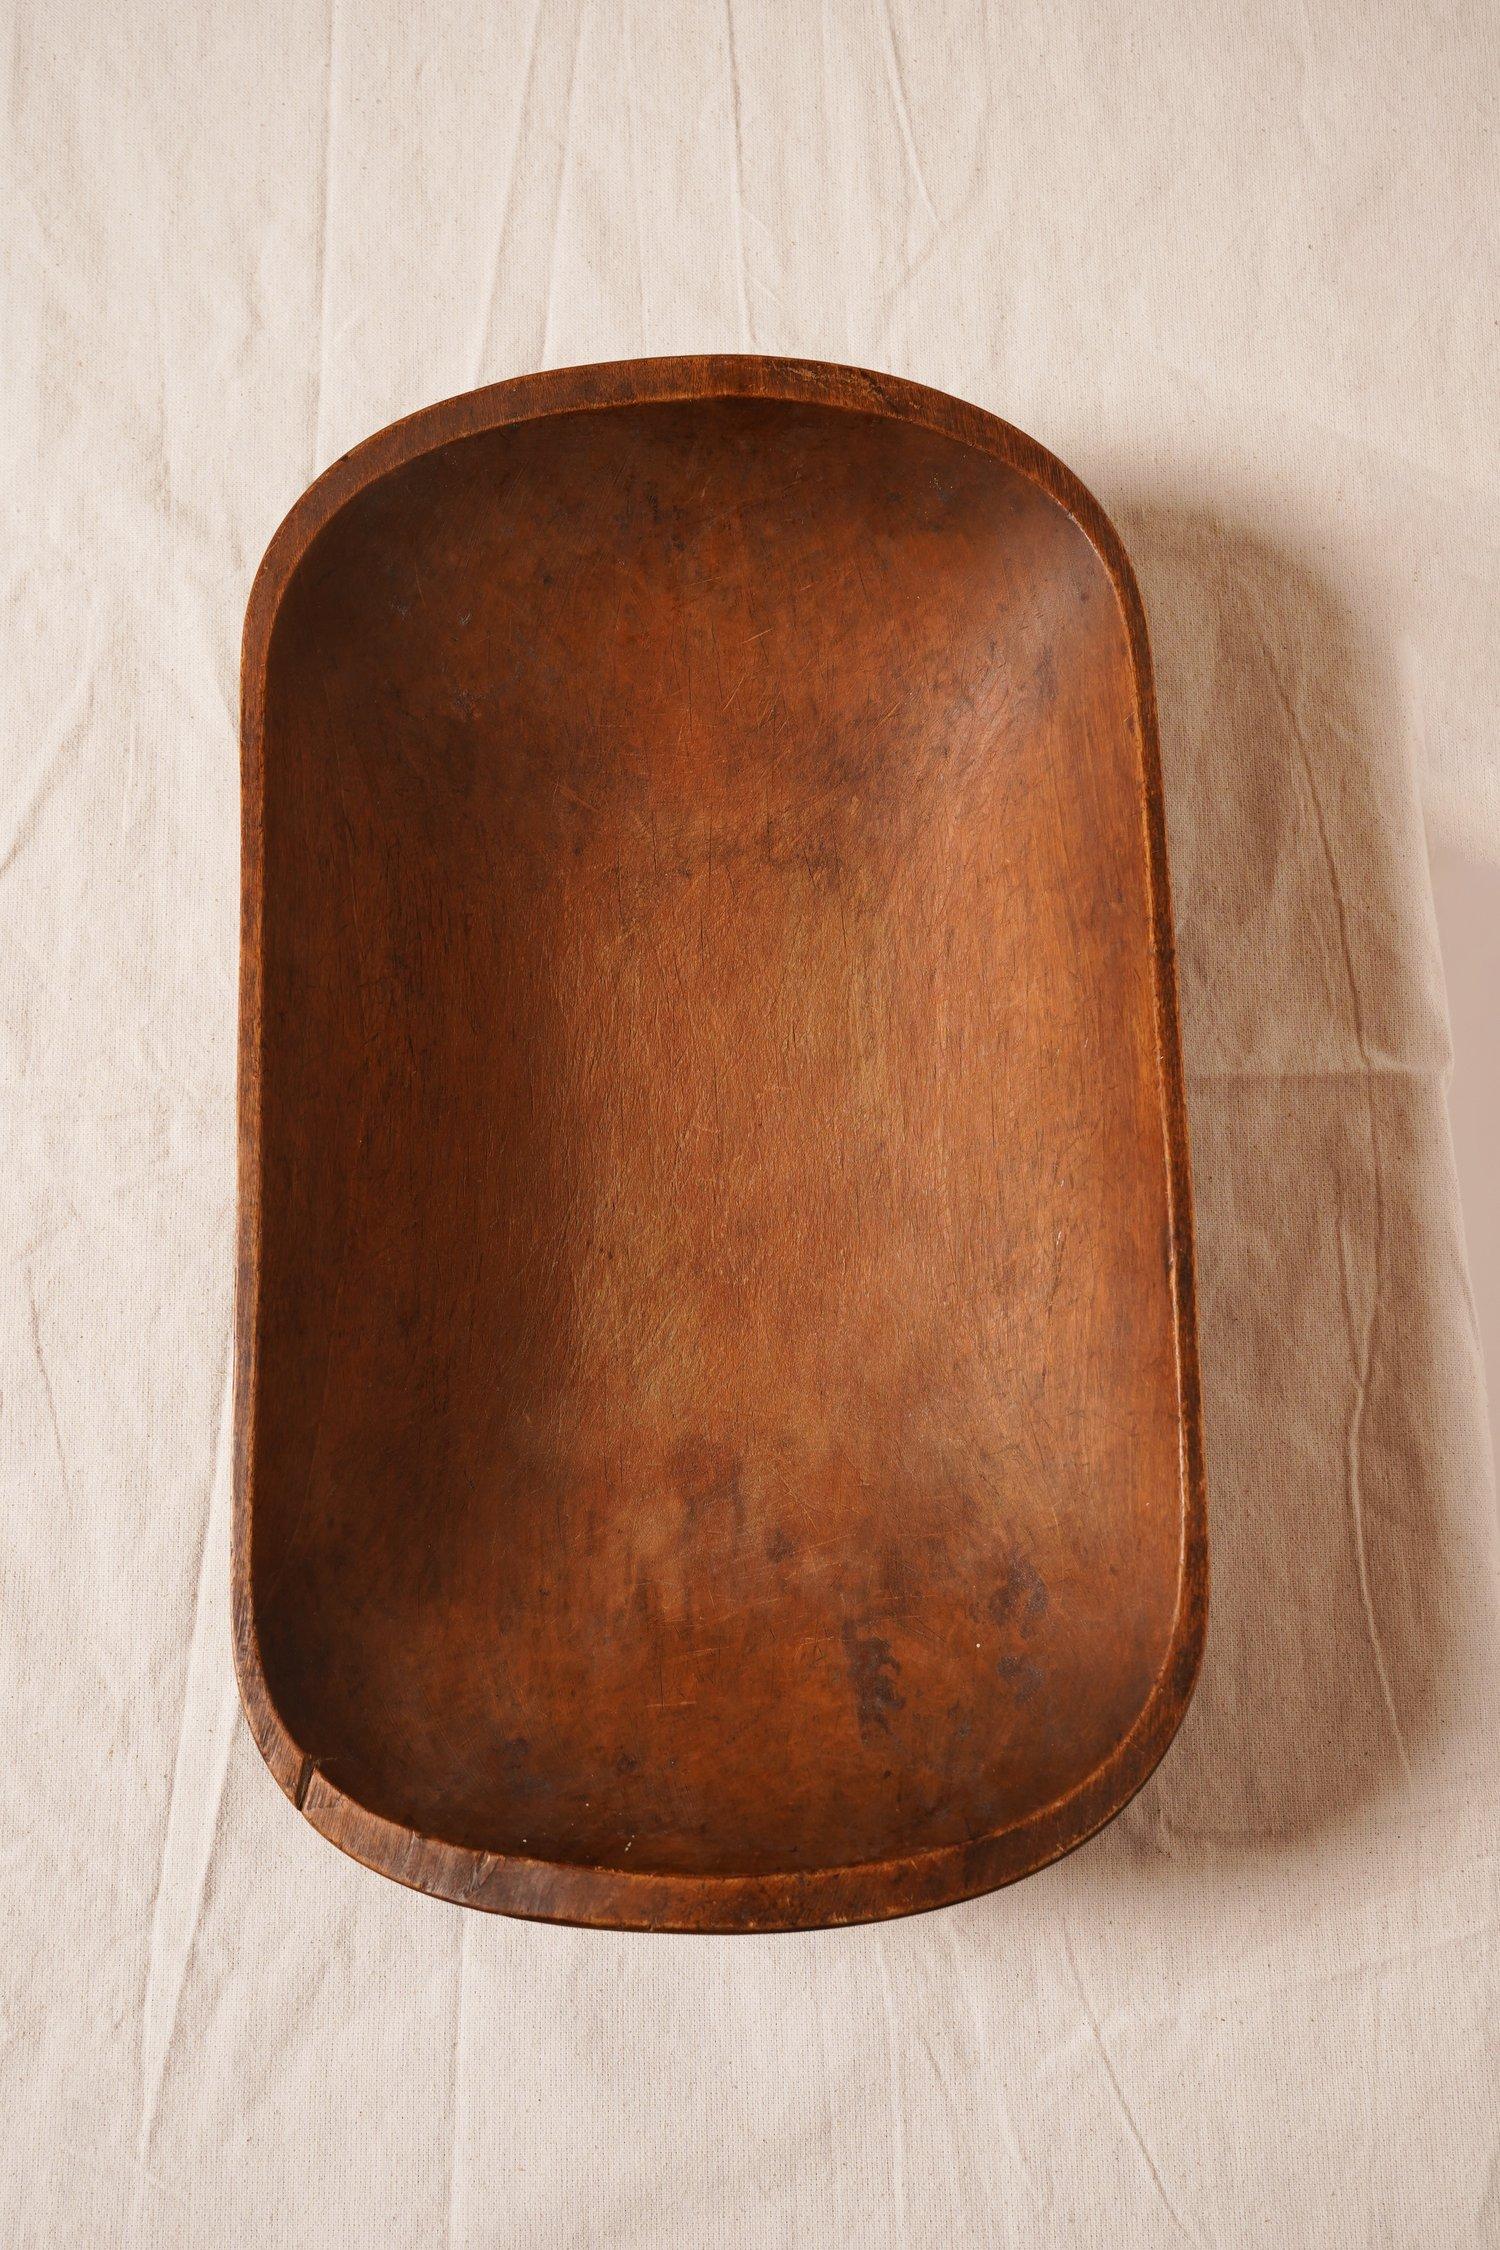 This trencher rectangular wooden dough bowl was traditionally used to prepare dough in the 19th century. This bowl can be used for storage or displayed as is.